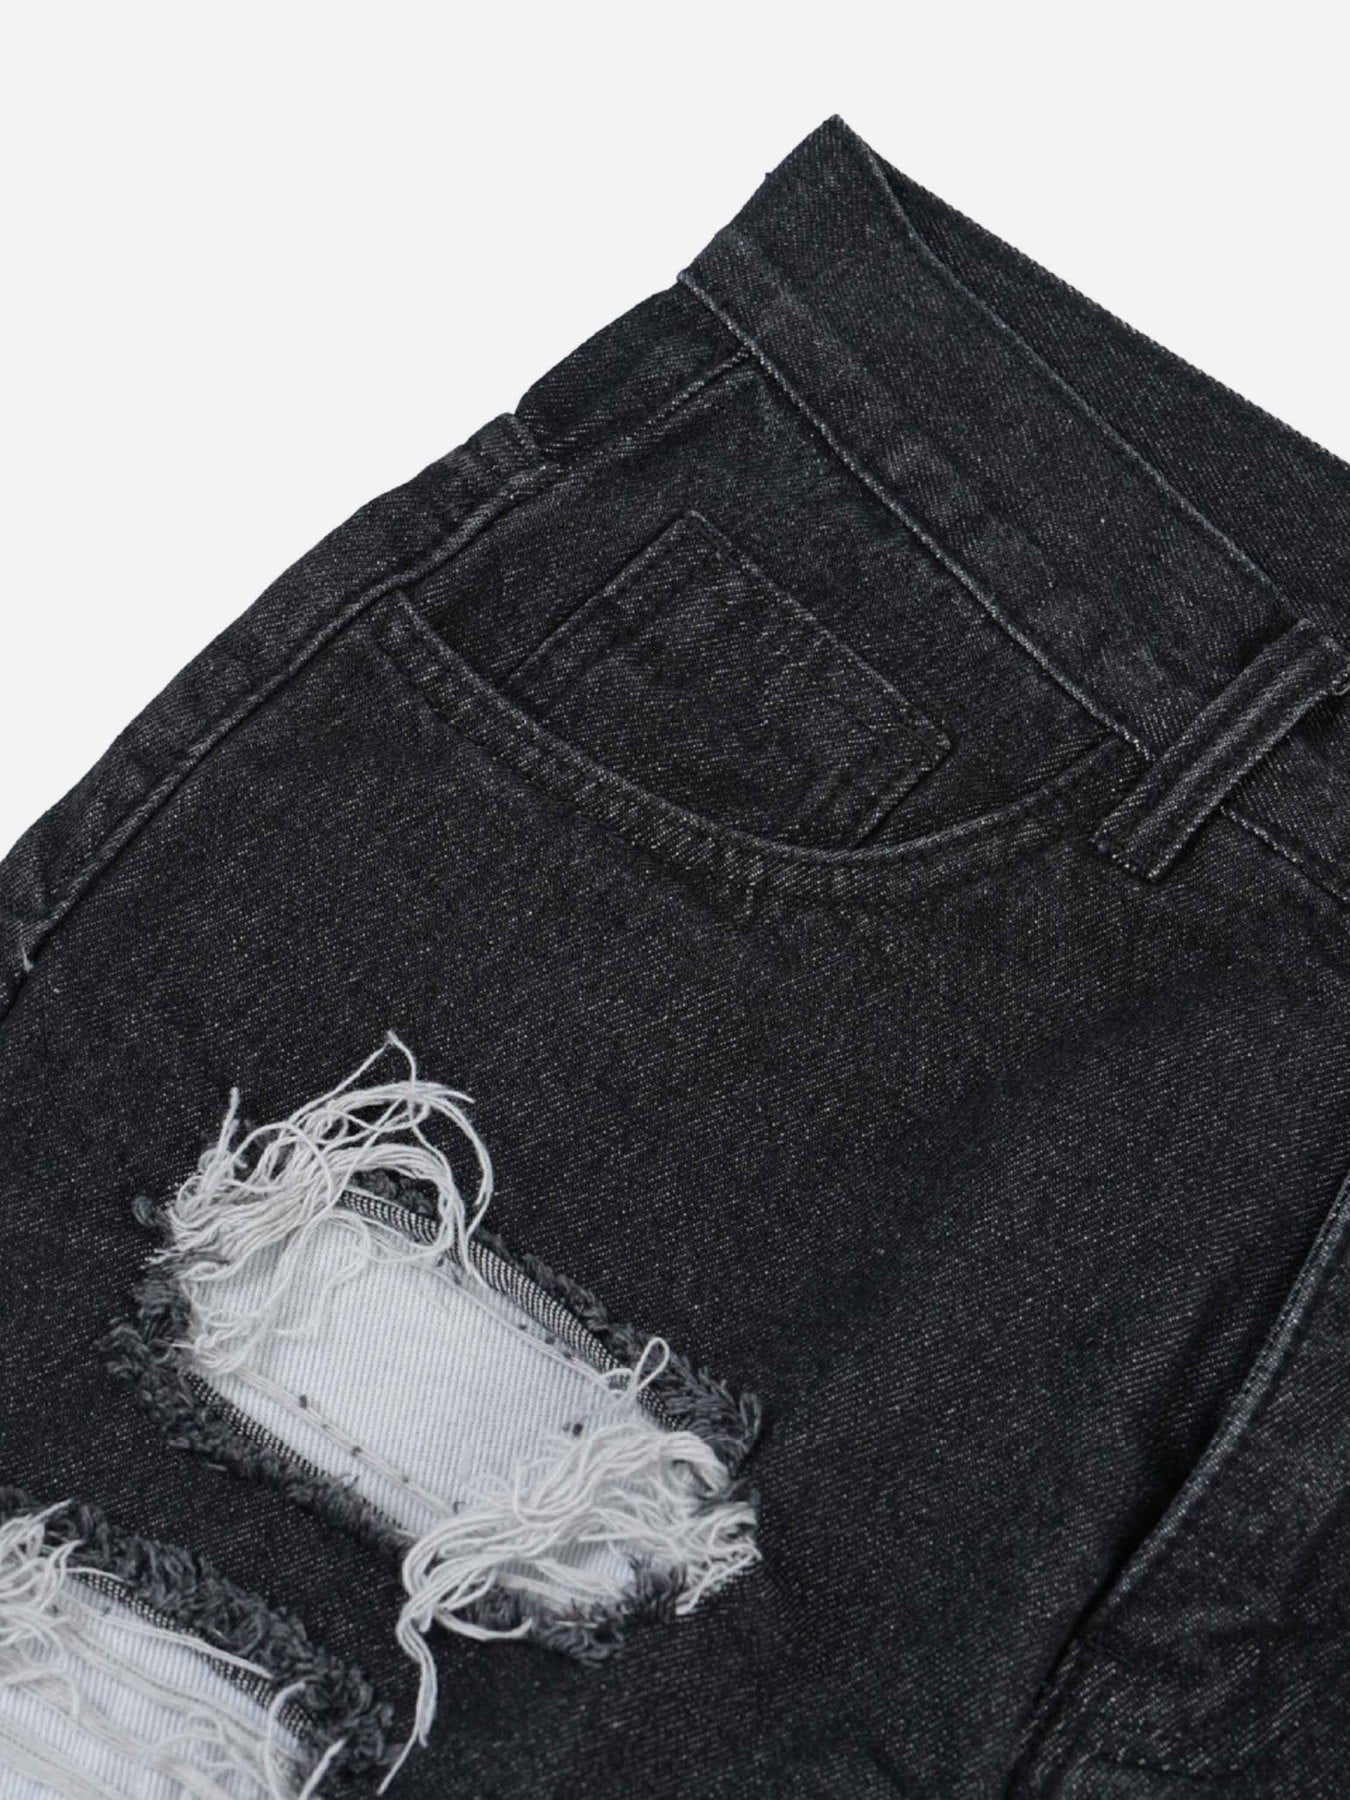 The Supermade High Street Frayed Cat Whisker Jeans - 1549